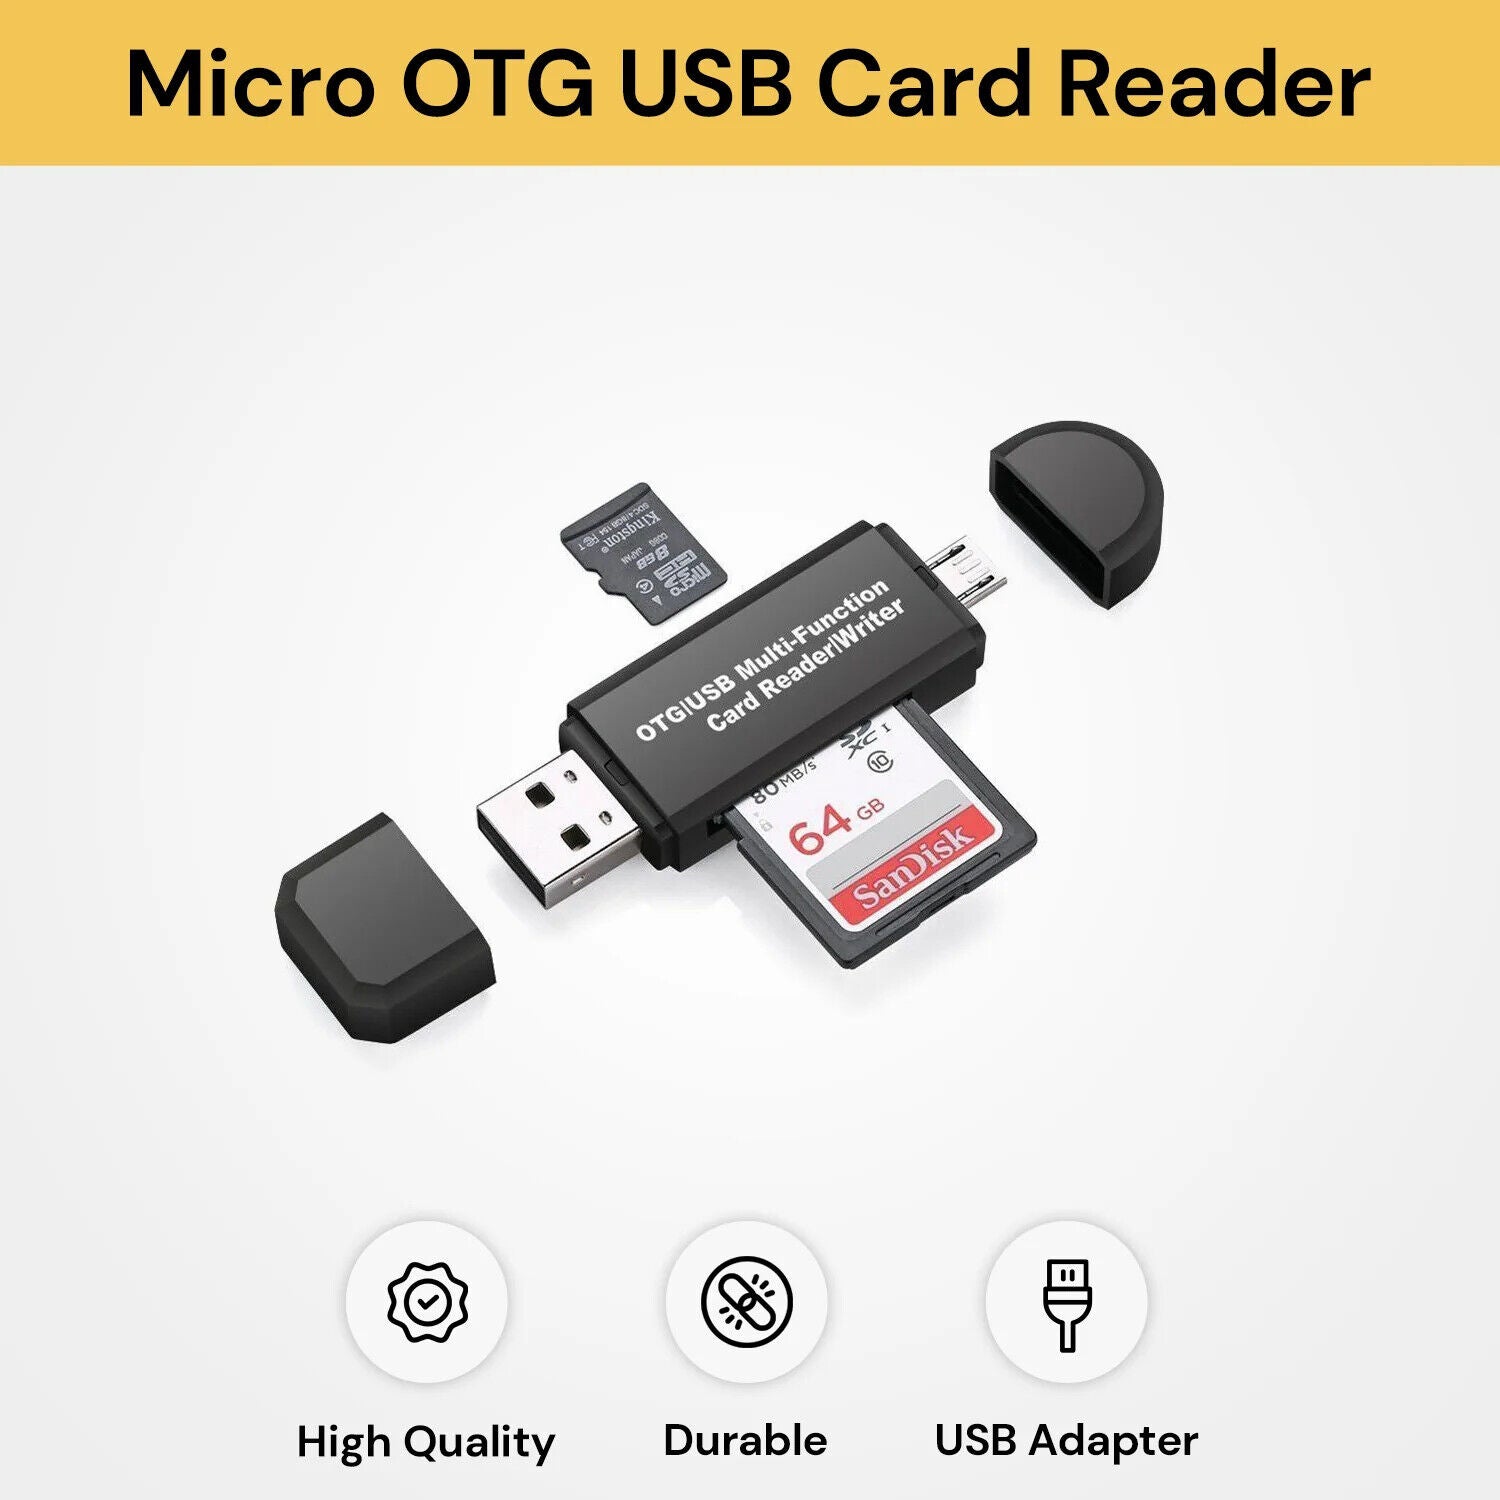 2 In 1 Micro USB OTG to USB 2.0 Adapter SD/Micro SD Card Reader For Smartphones